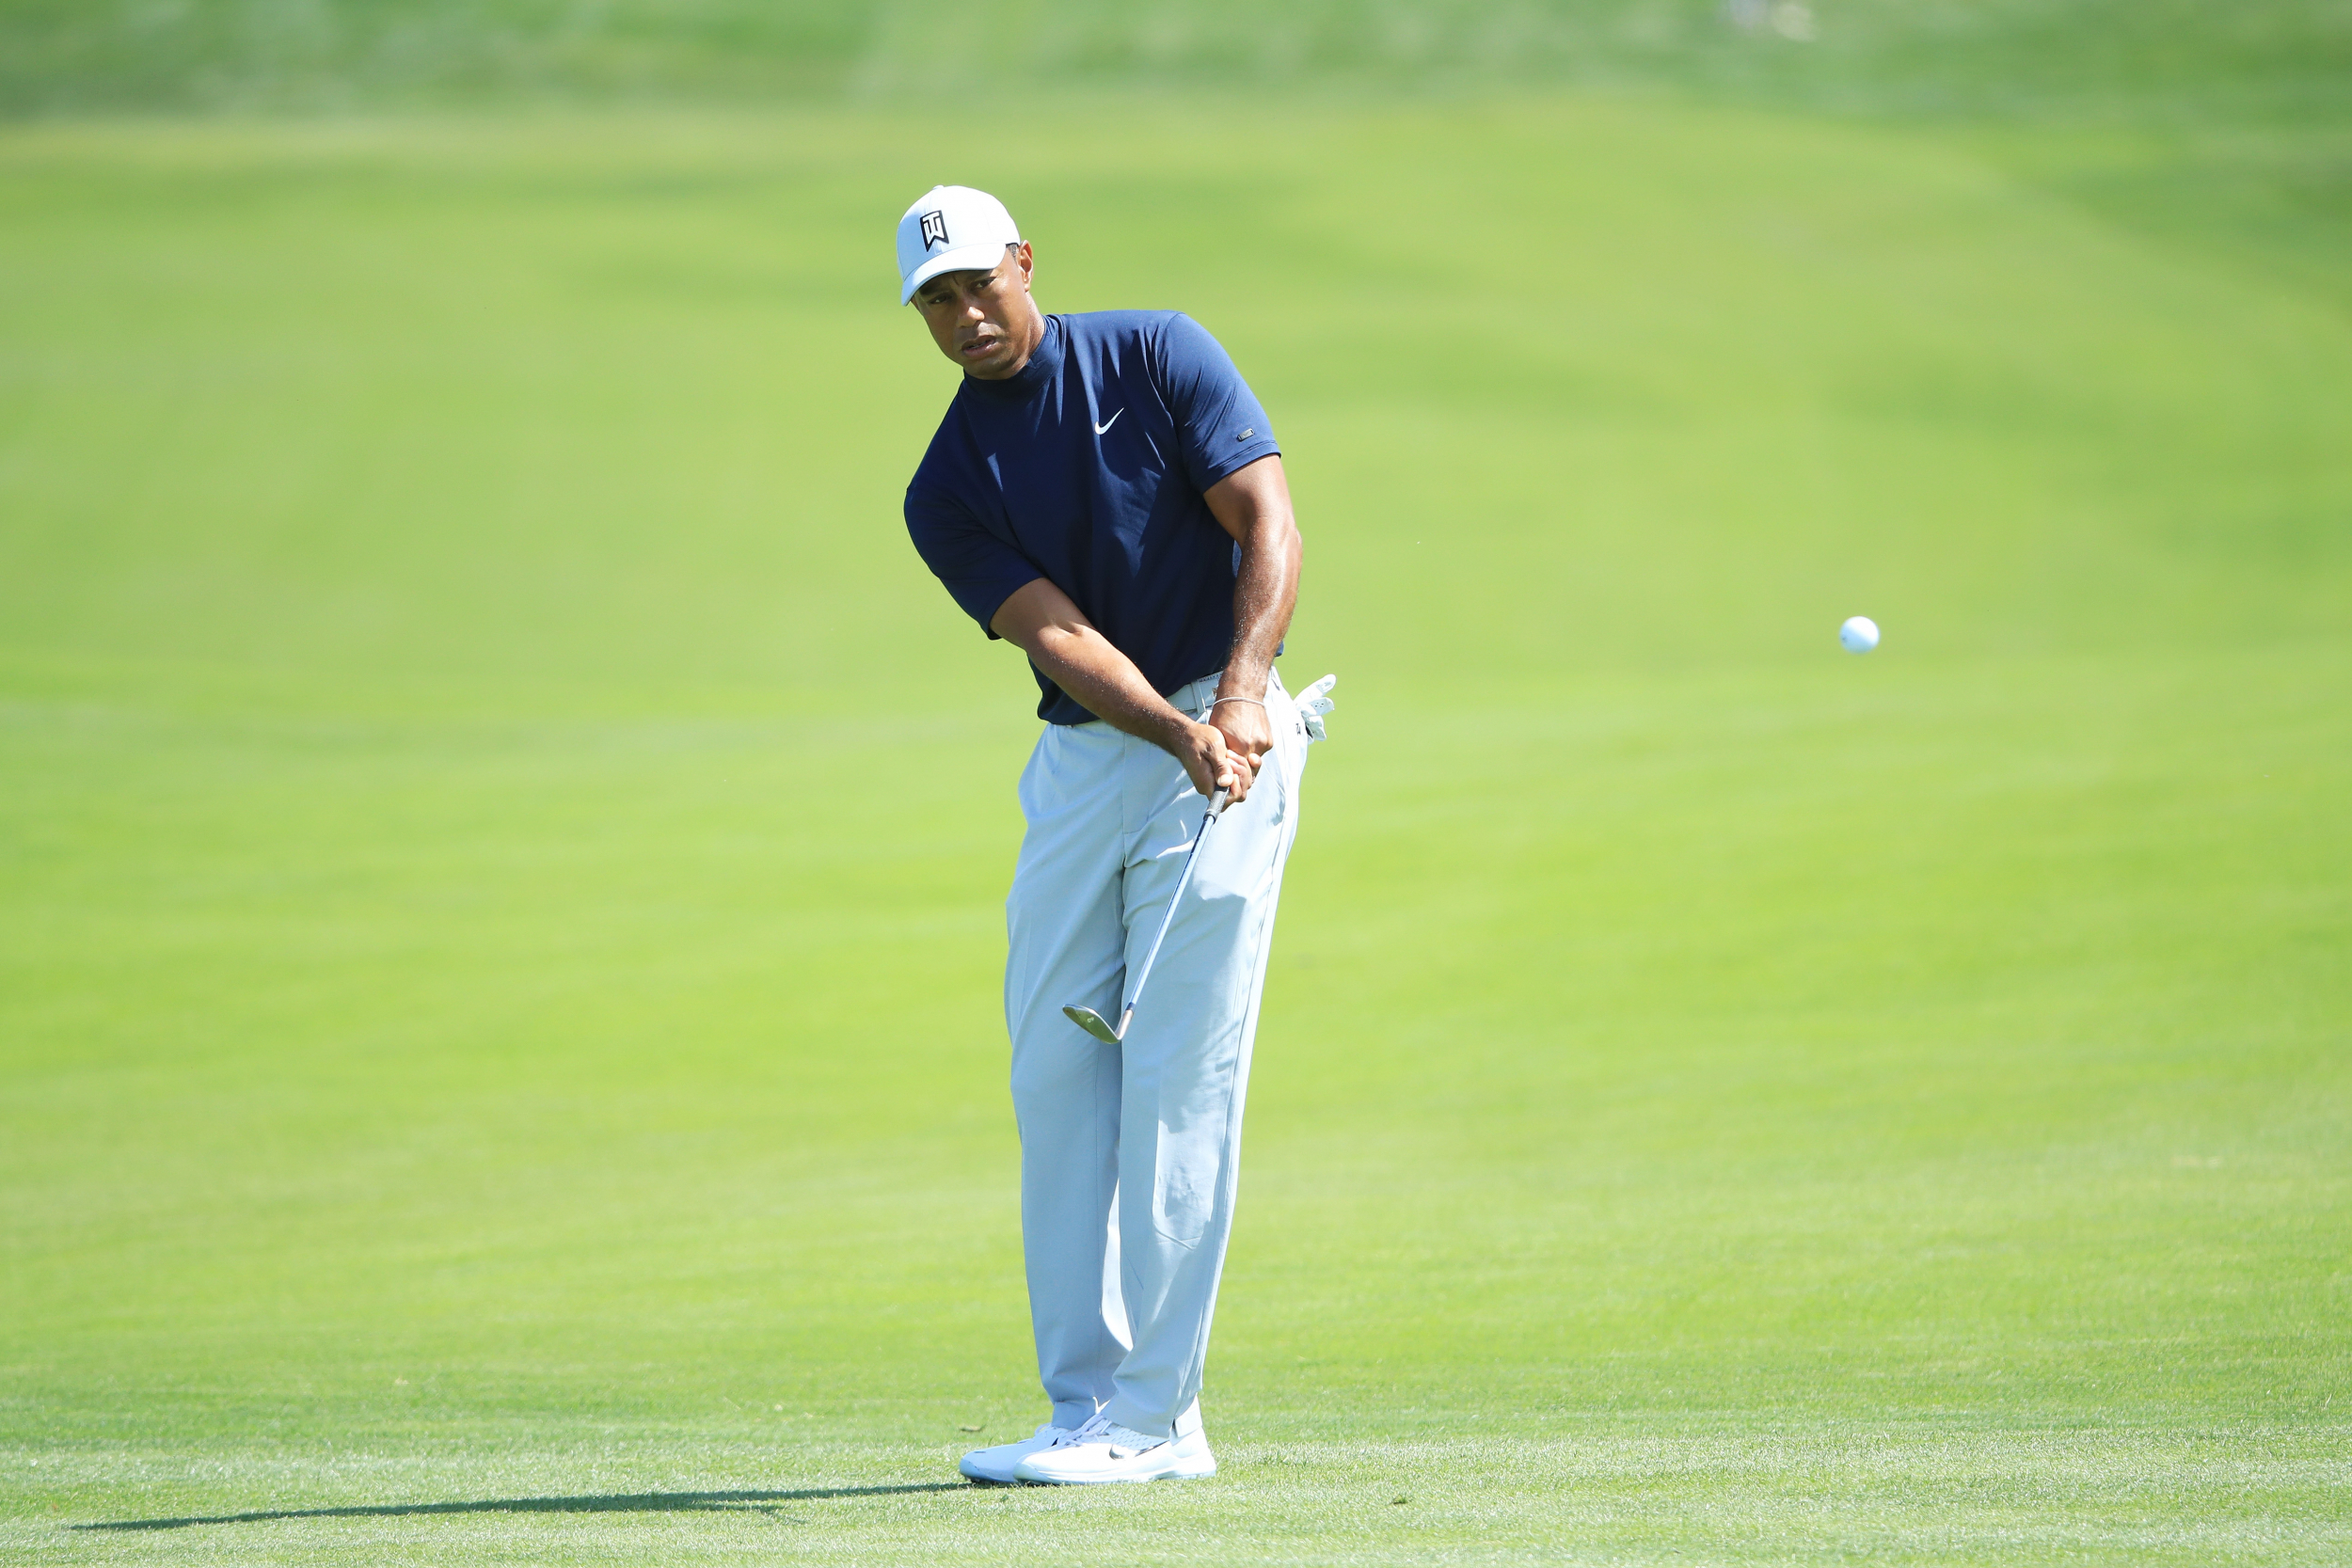 U.S. Open 2019 Can Tiger Woods Win at Pebble Beach?